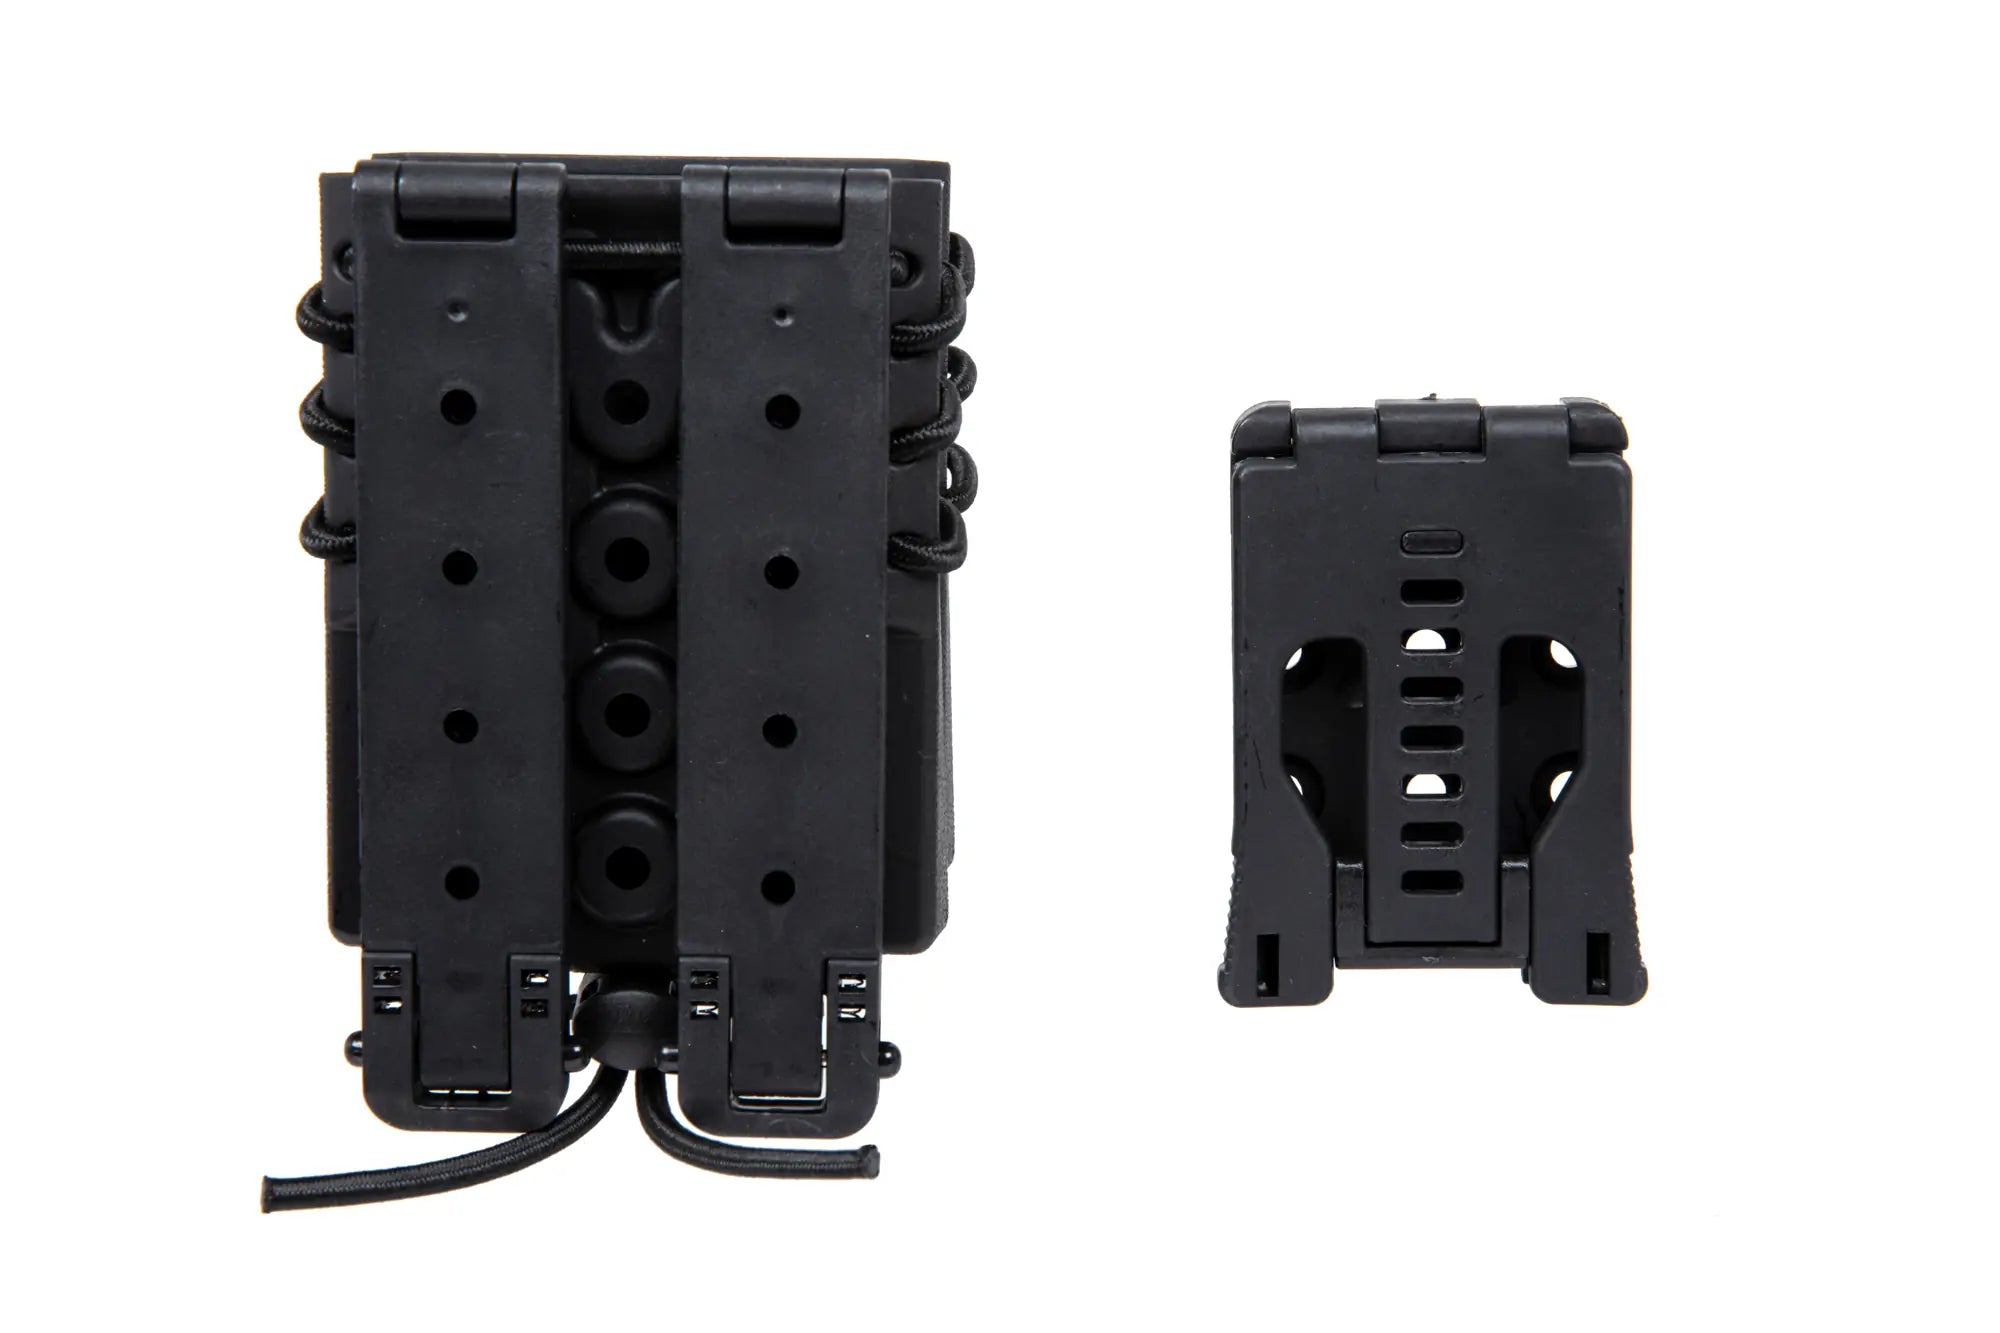 Carrier for 2 M4/M16 magazines Wosport Urban Assault Quick Pull Black